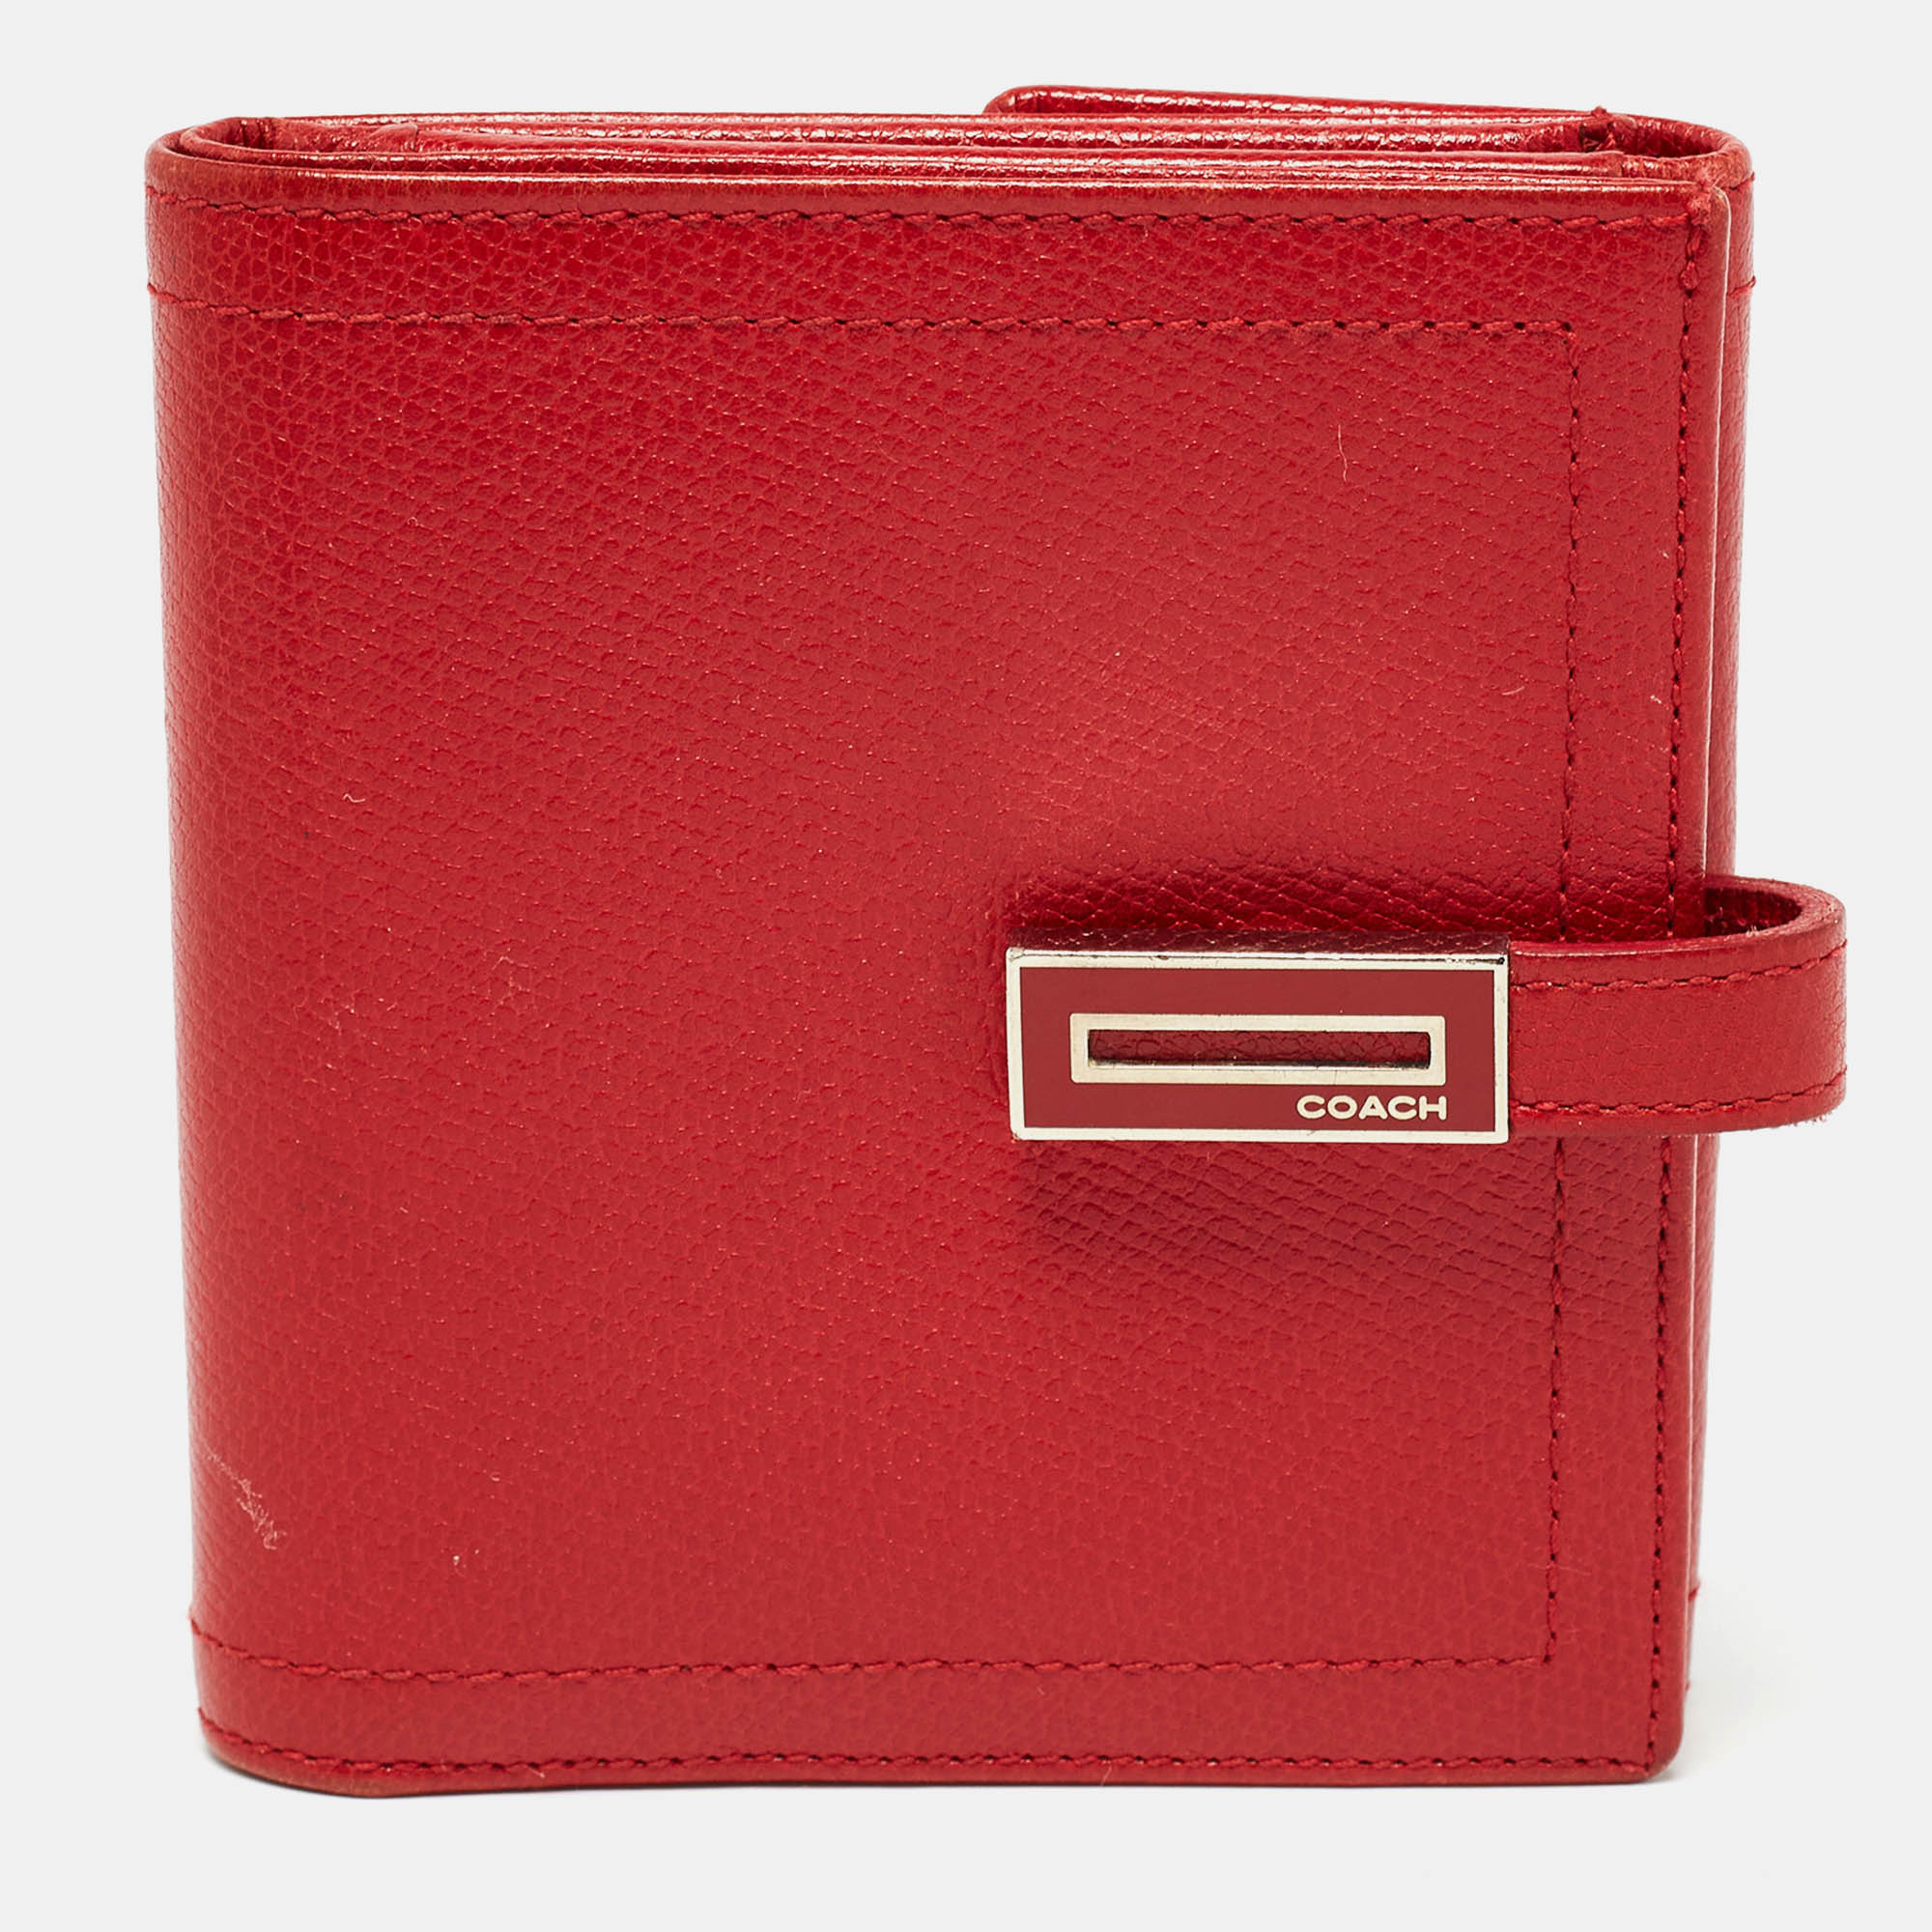 Pre-owned Coach Red Leather Metal Flap Compact Wallet